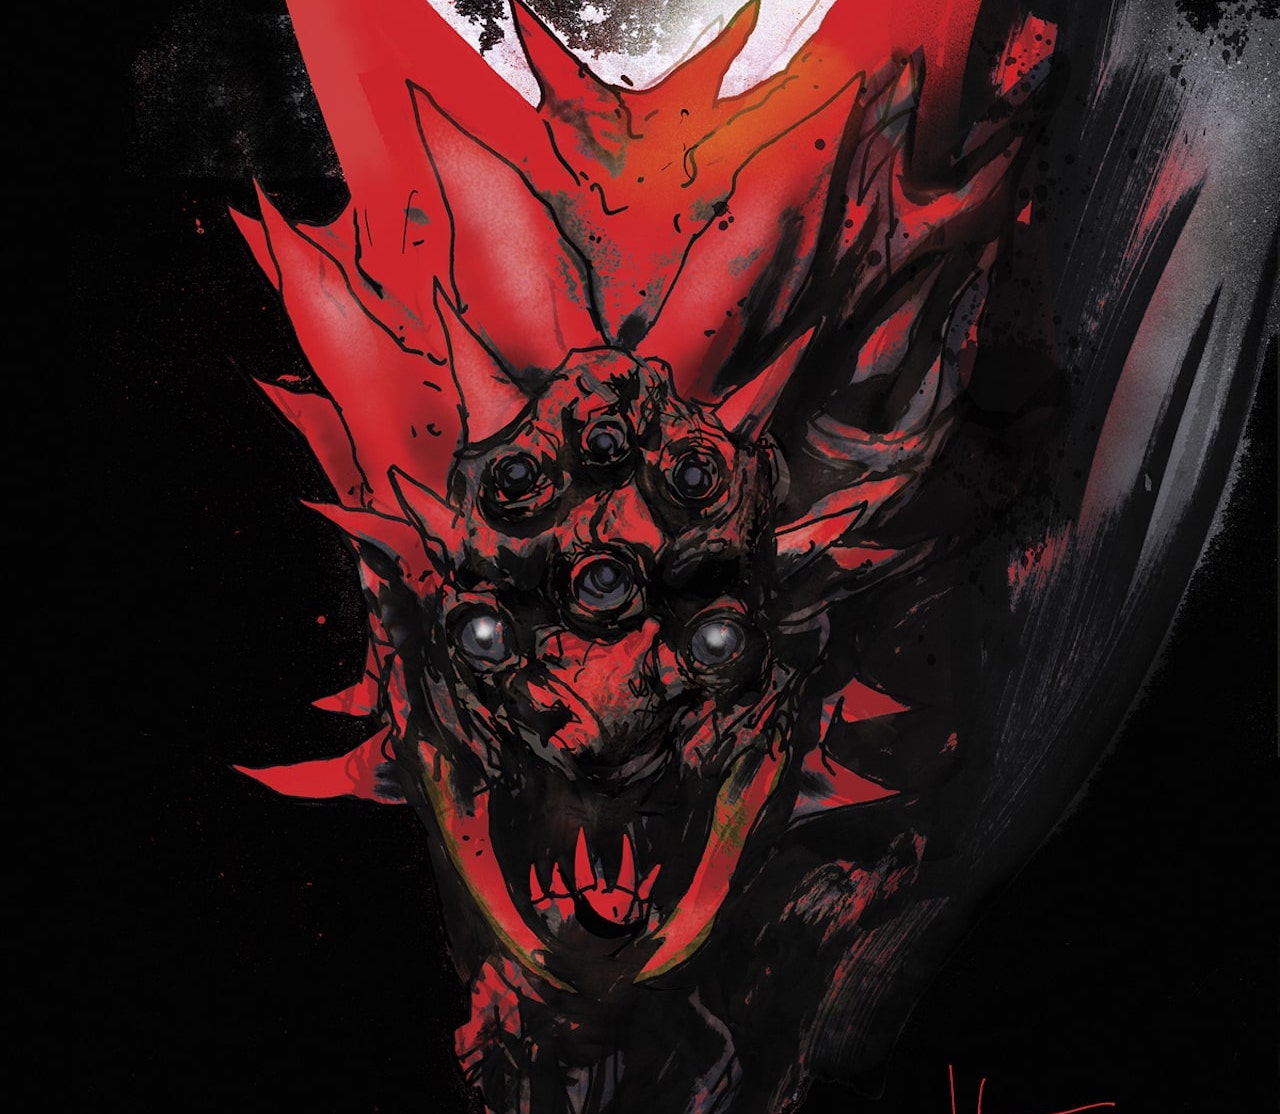 'We Have Demons' from Scott Snyder & Greg Capullo going to print March 2022